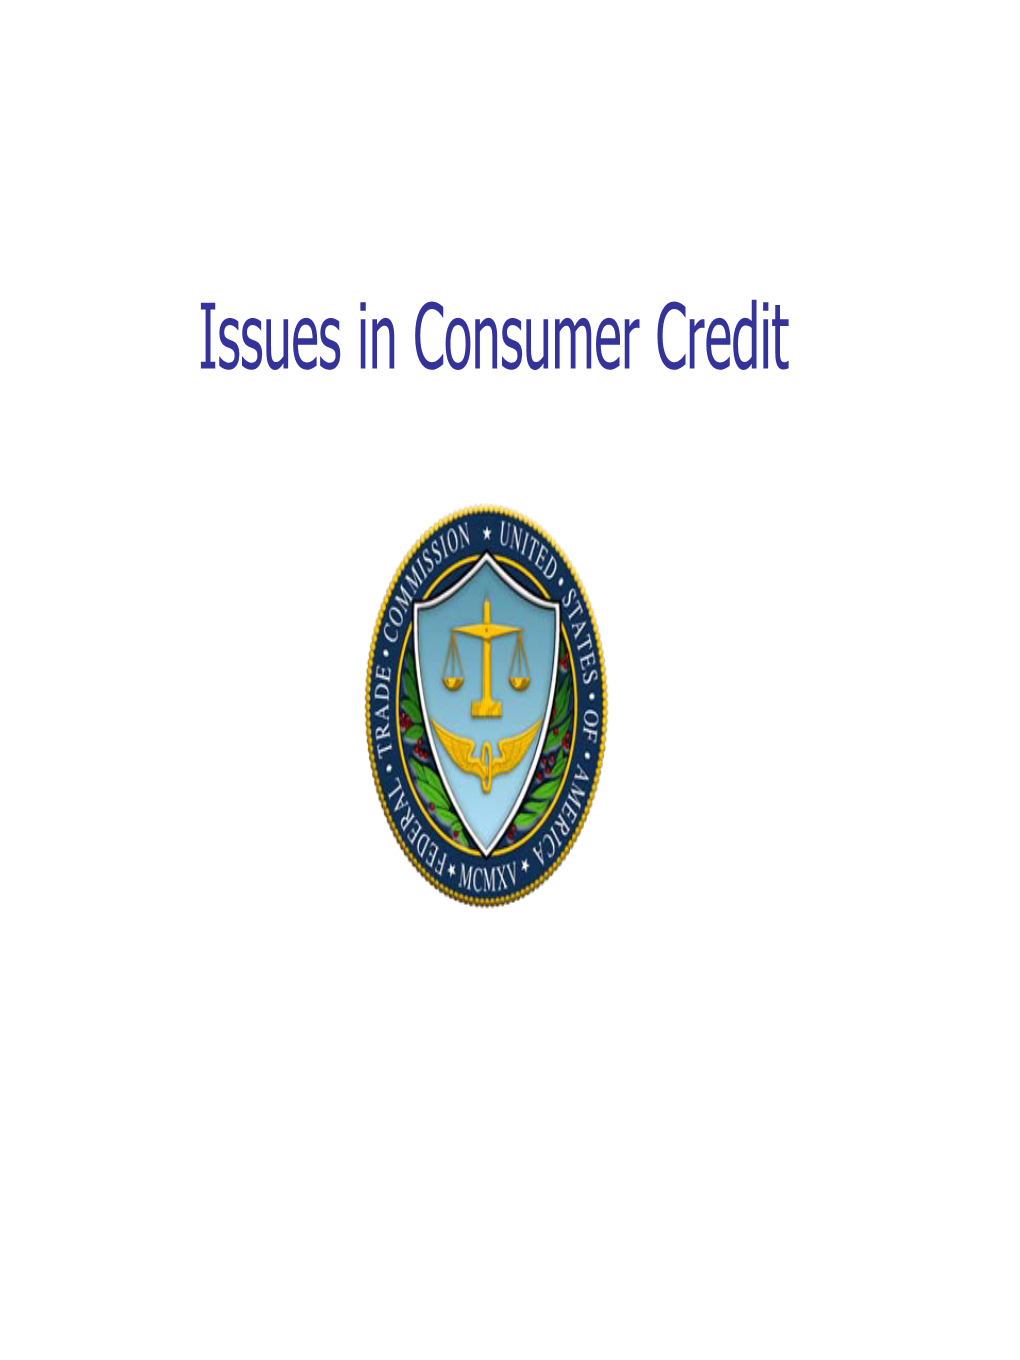 Issues in Consumer Credit Topics Overview